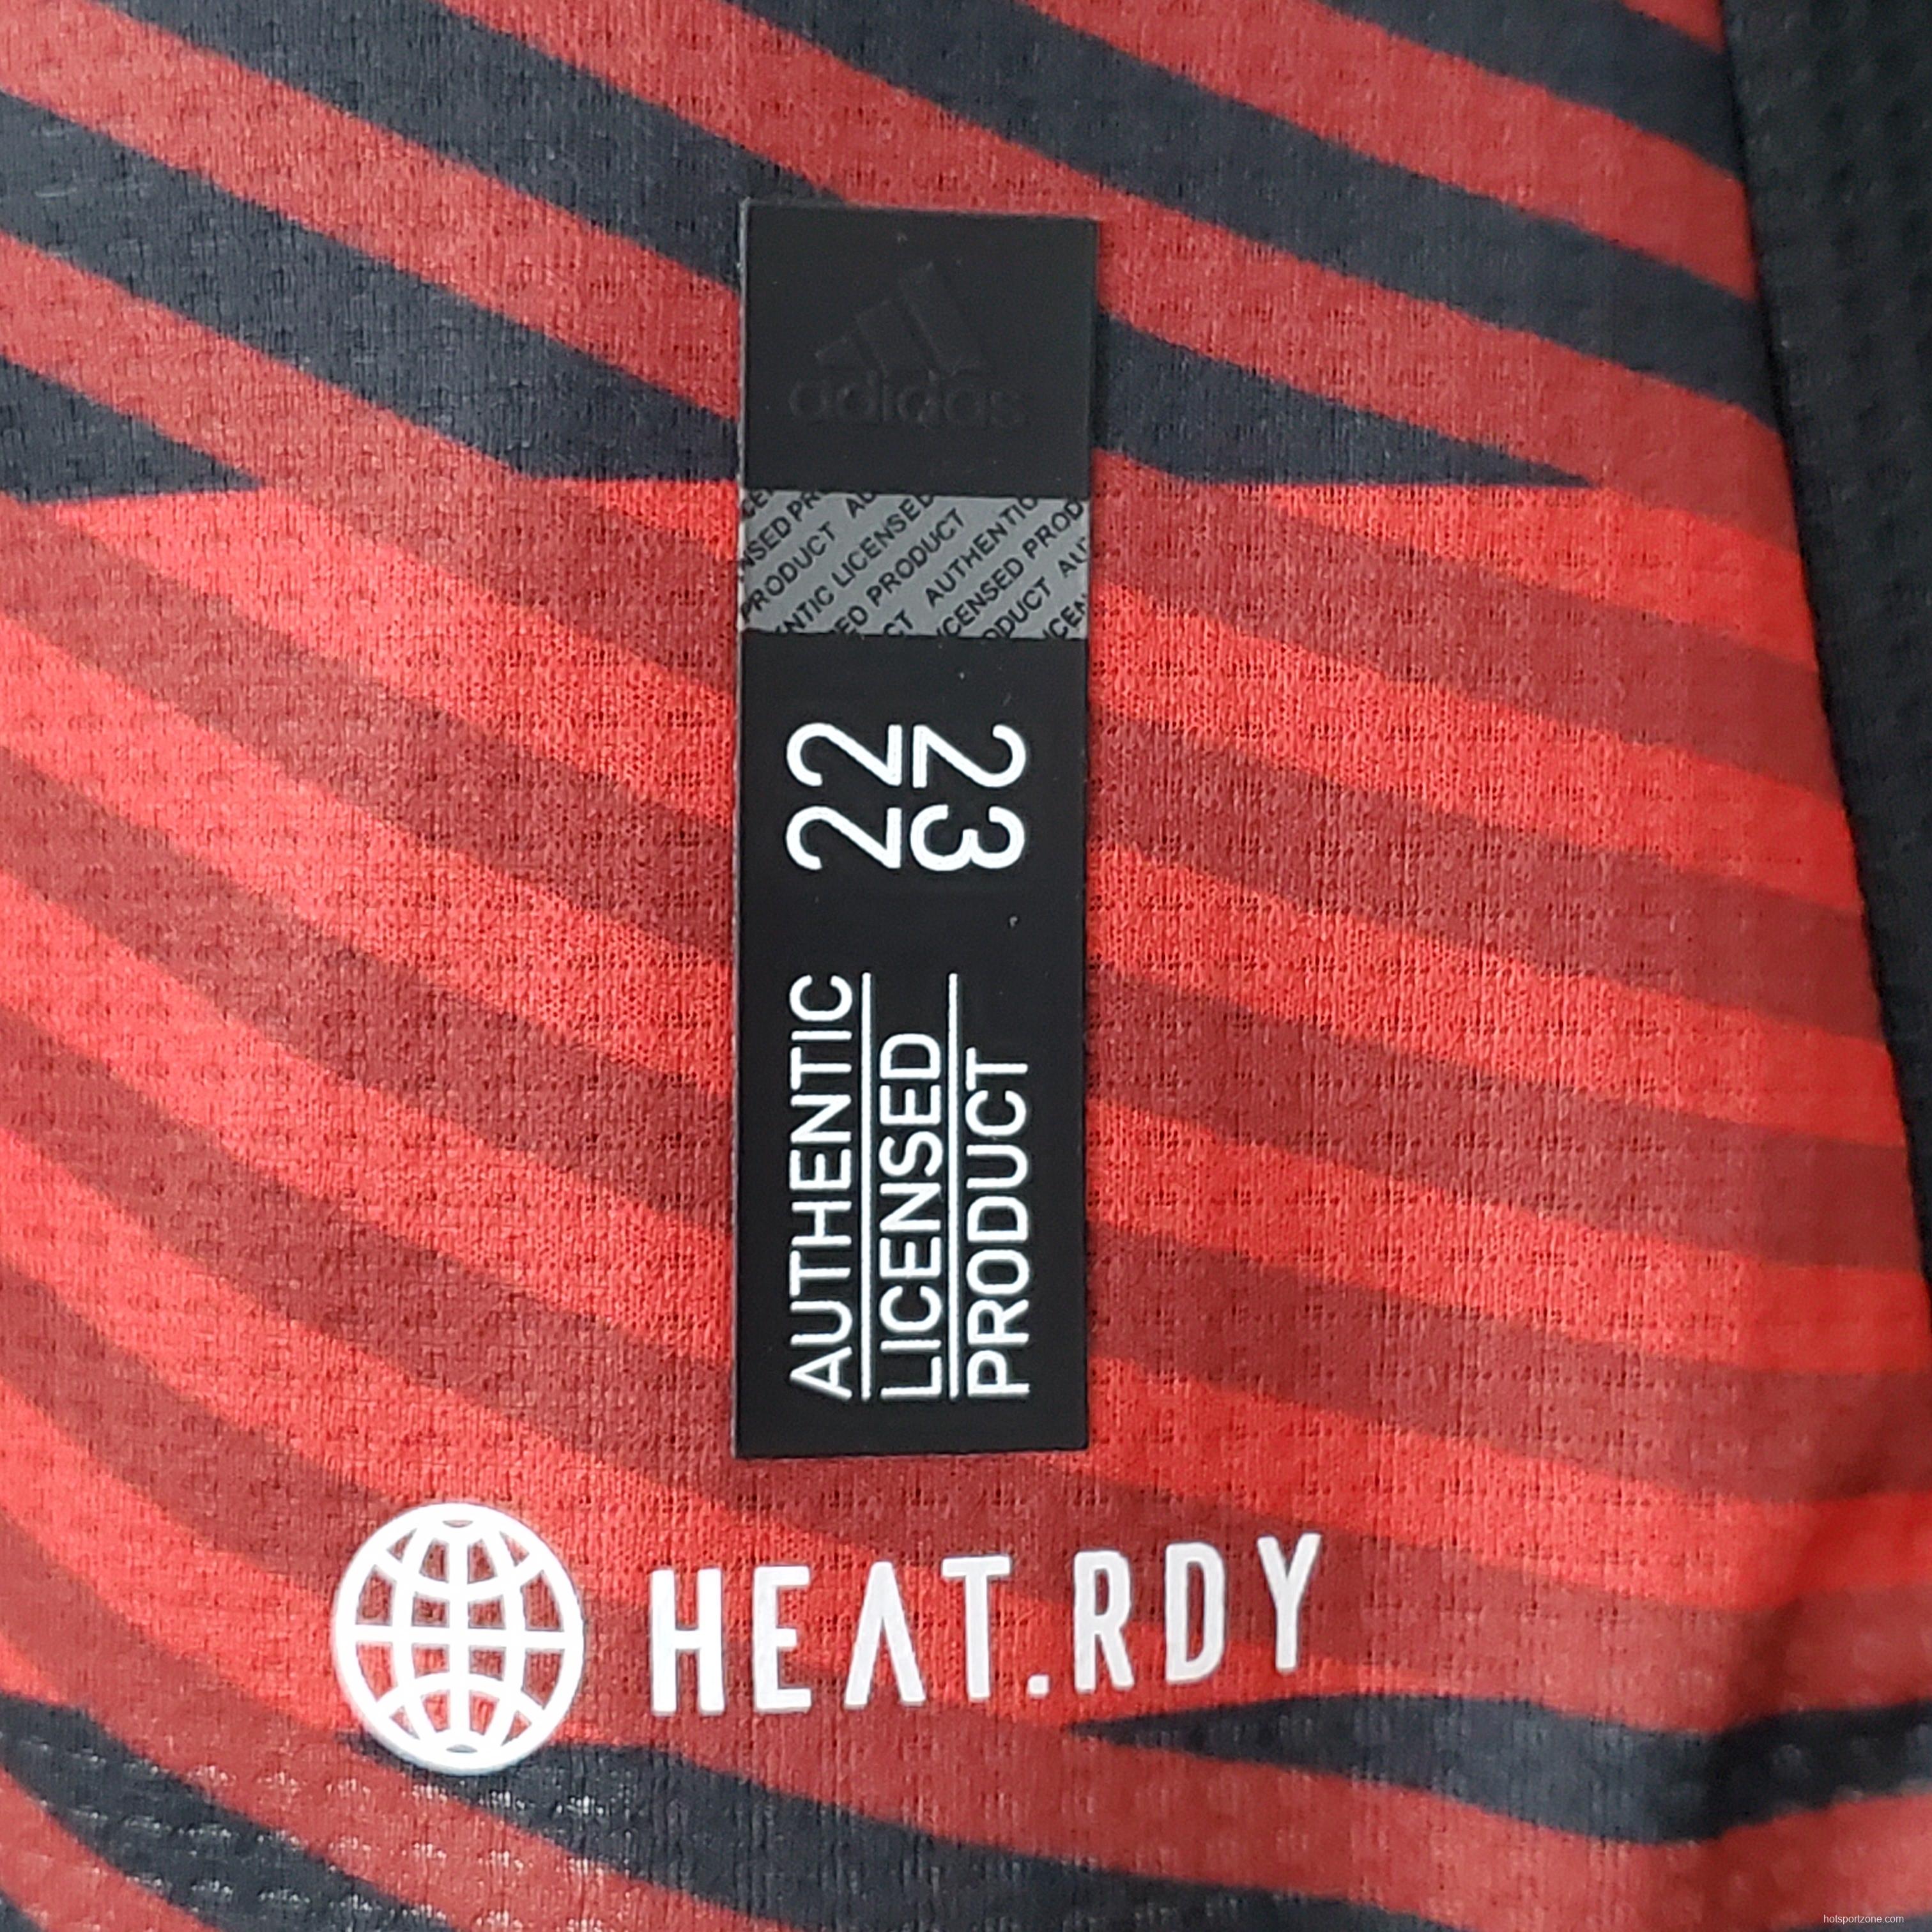 22/23 player version flamengo home Soccer Jersey